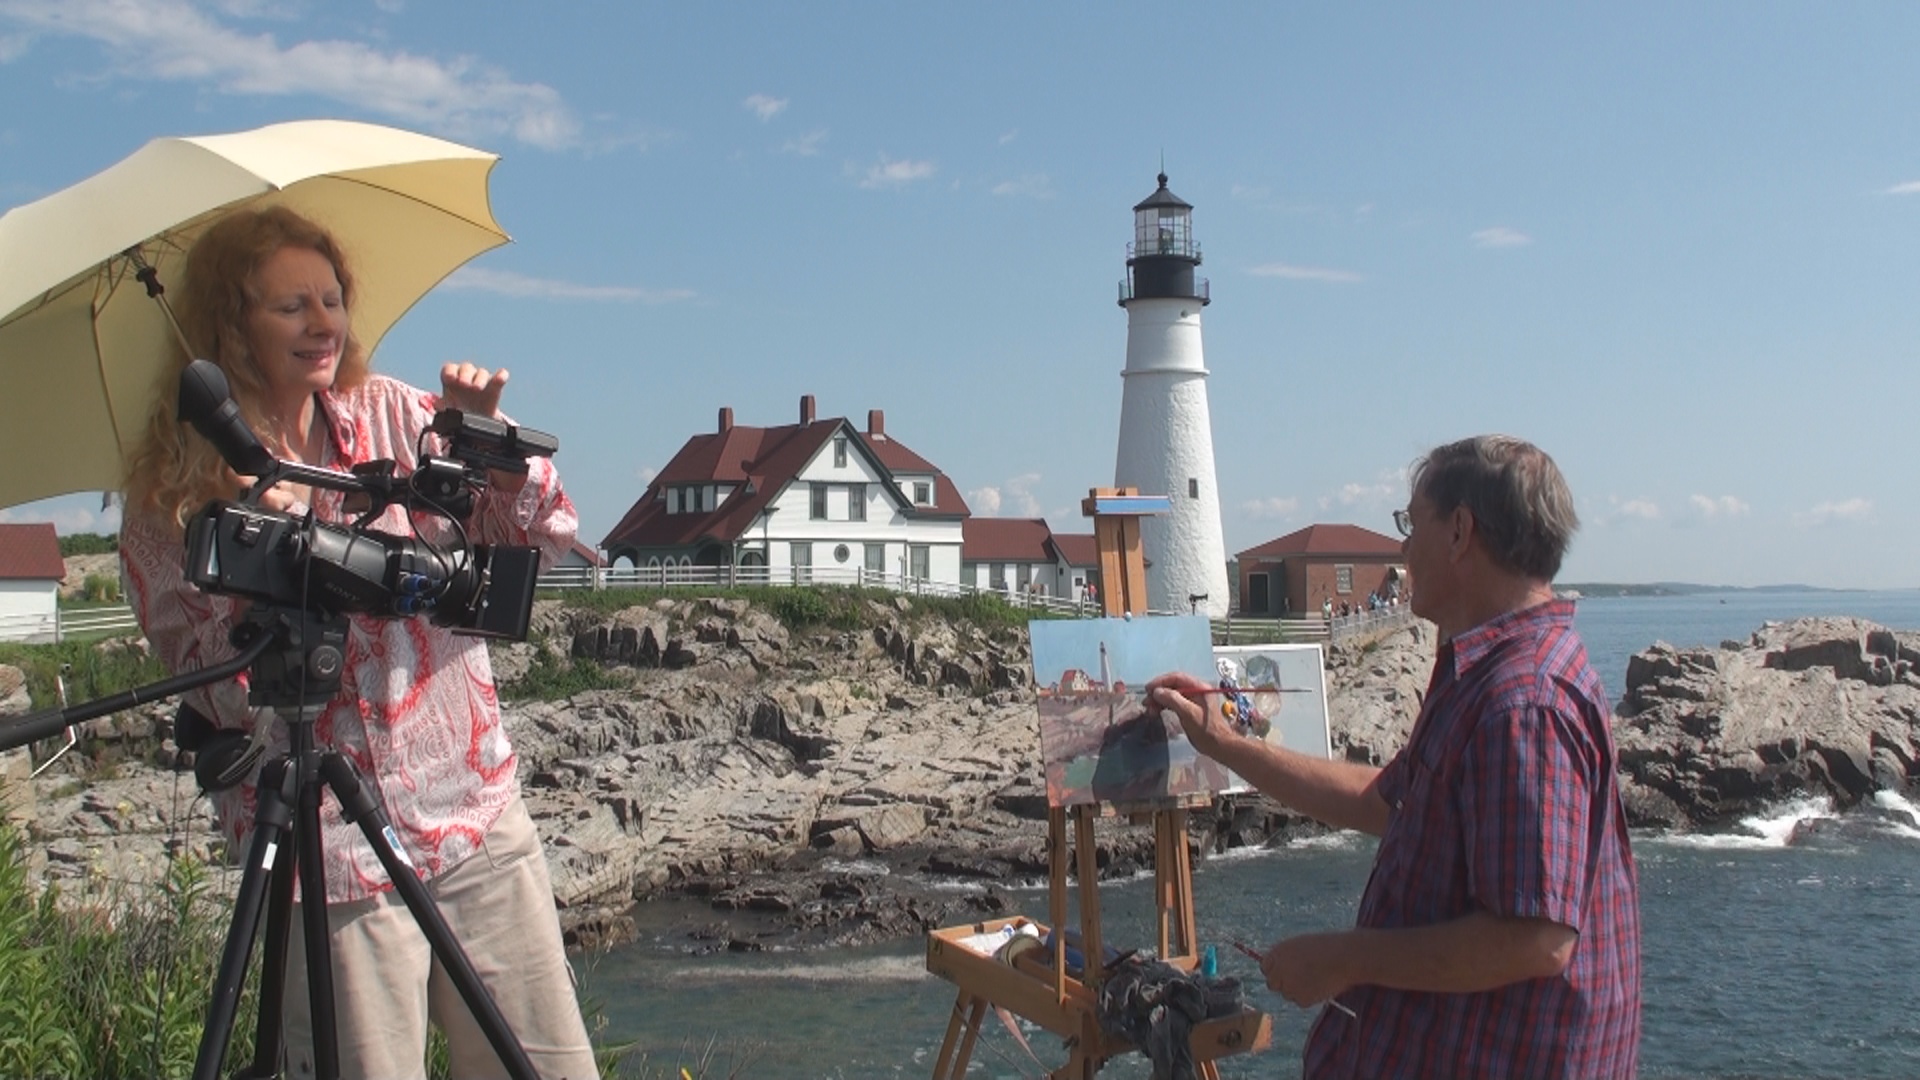 Roger and Sarah Bansemer of St. Augustine work on a shot for their public television program "Painting and Travel with Roger and Sarah Bansemer." They are near the Portland Light historic lighthouse in Maine. | Roger Bansemer